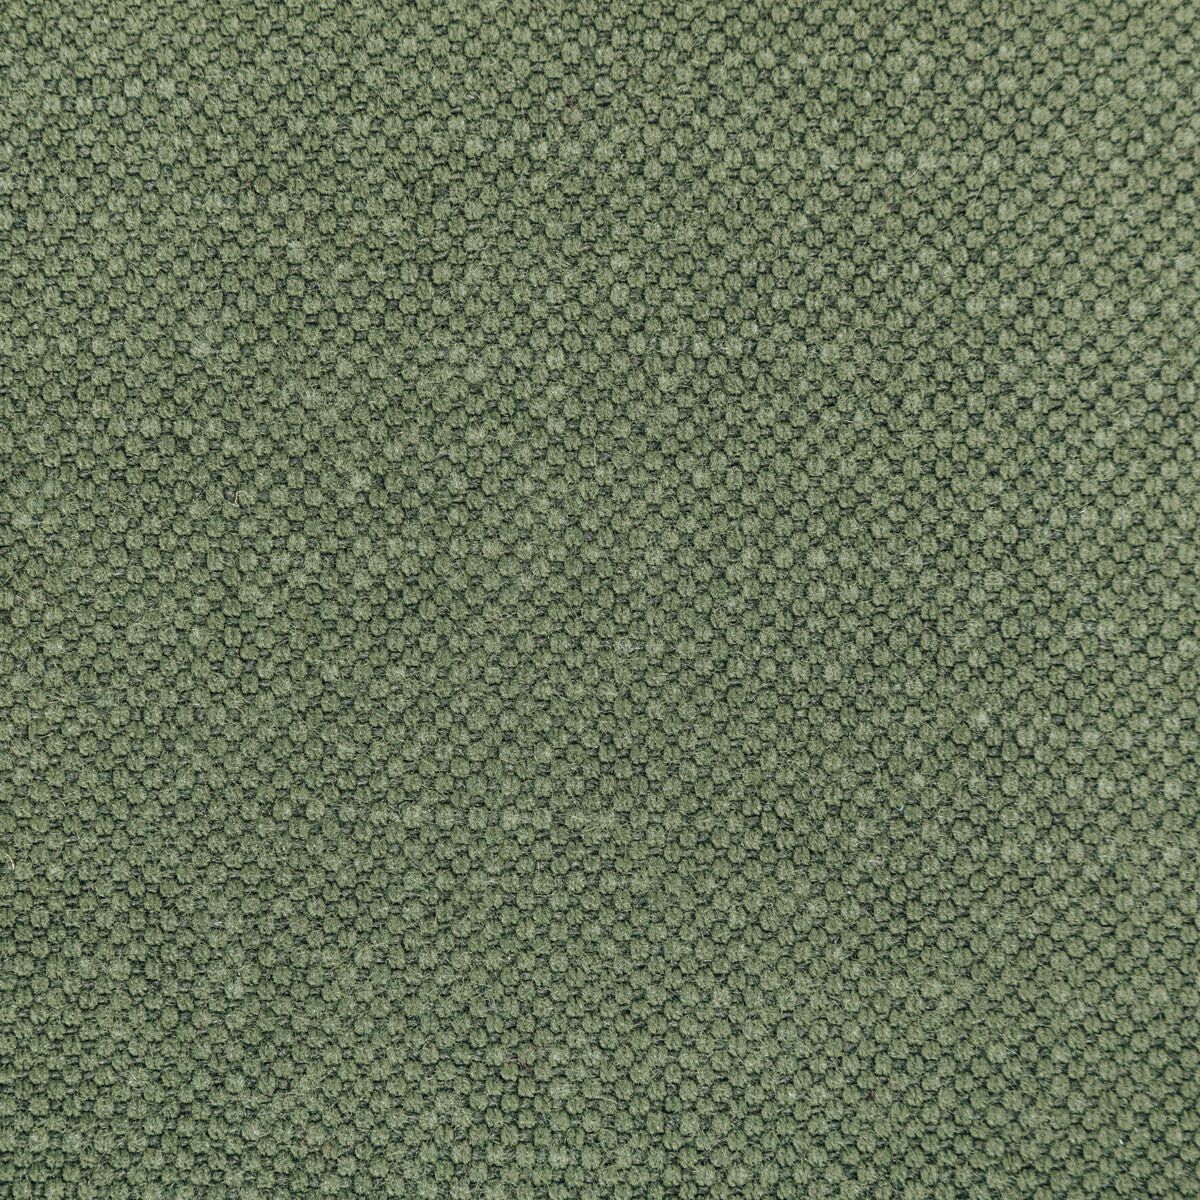 Carson fabric in olive color - pattern 36282.30.0 - by Kravet Basics